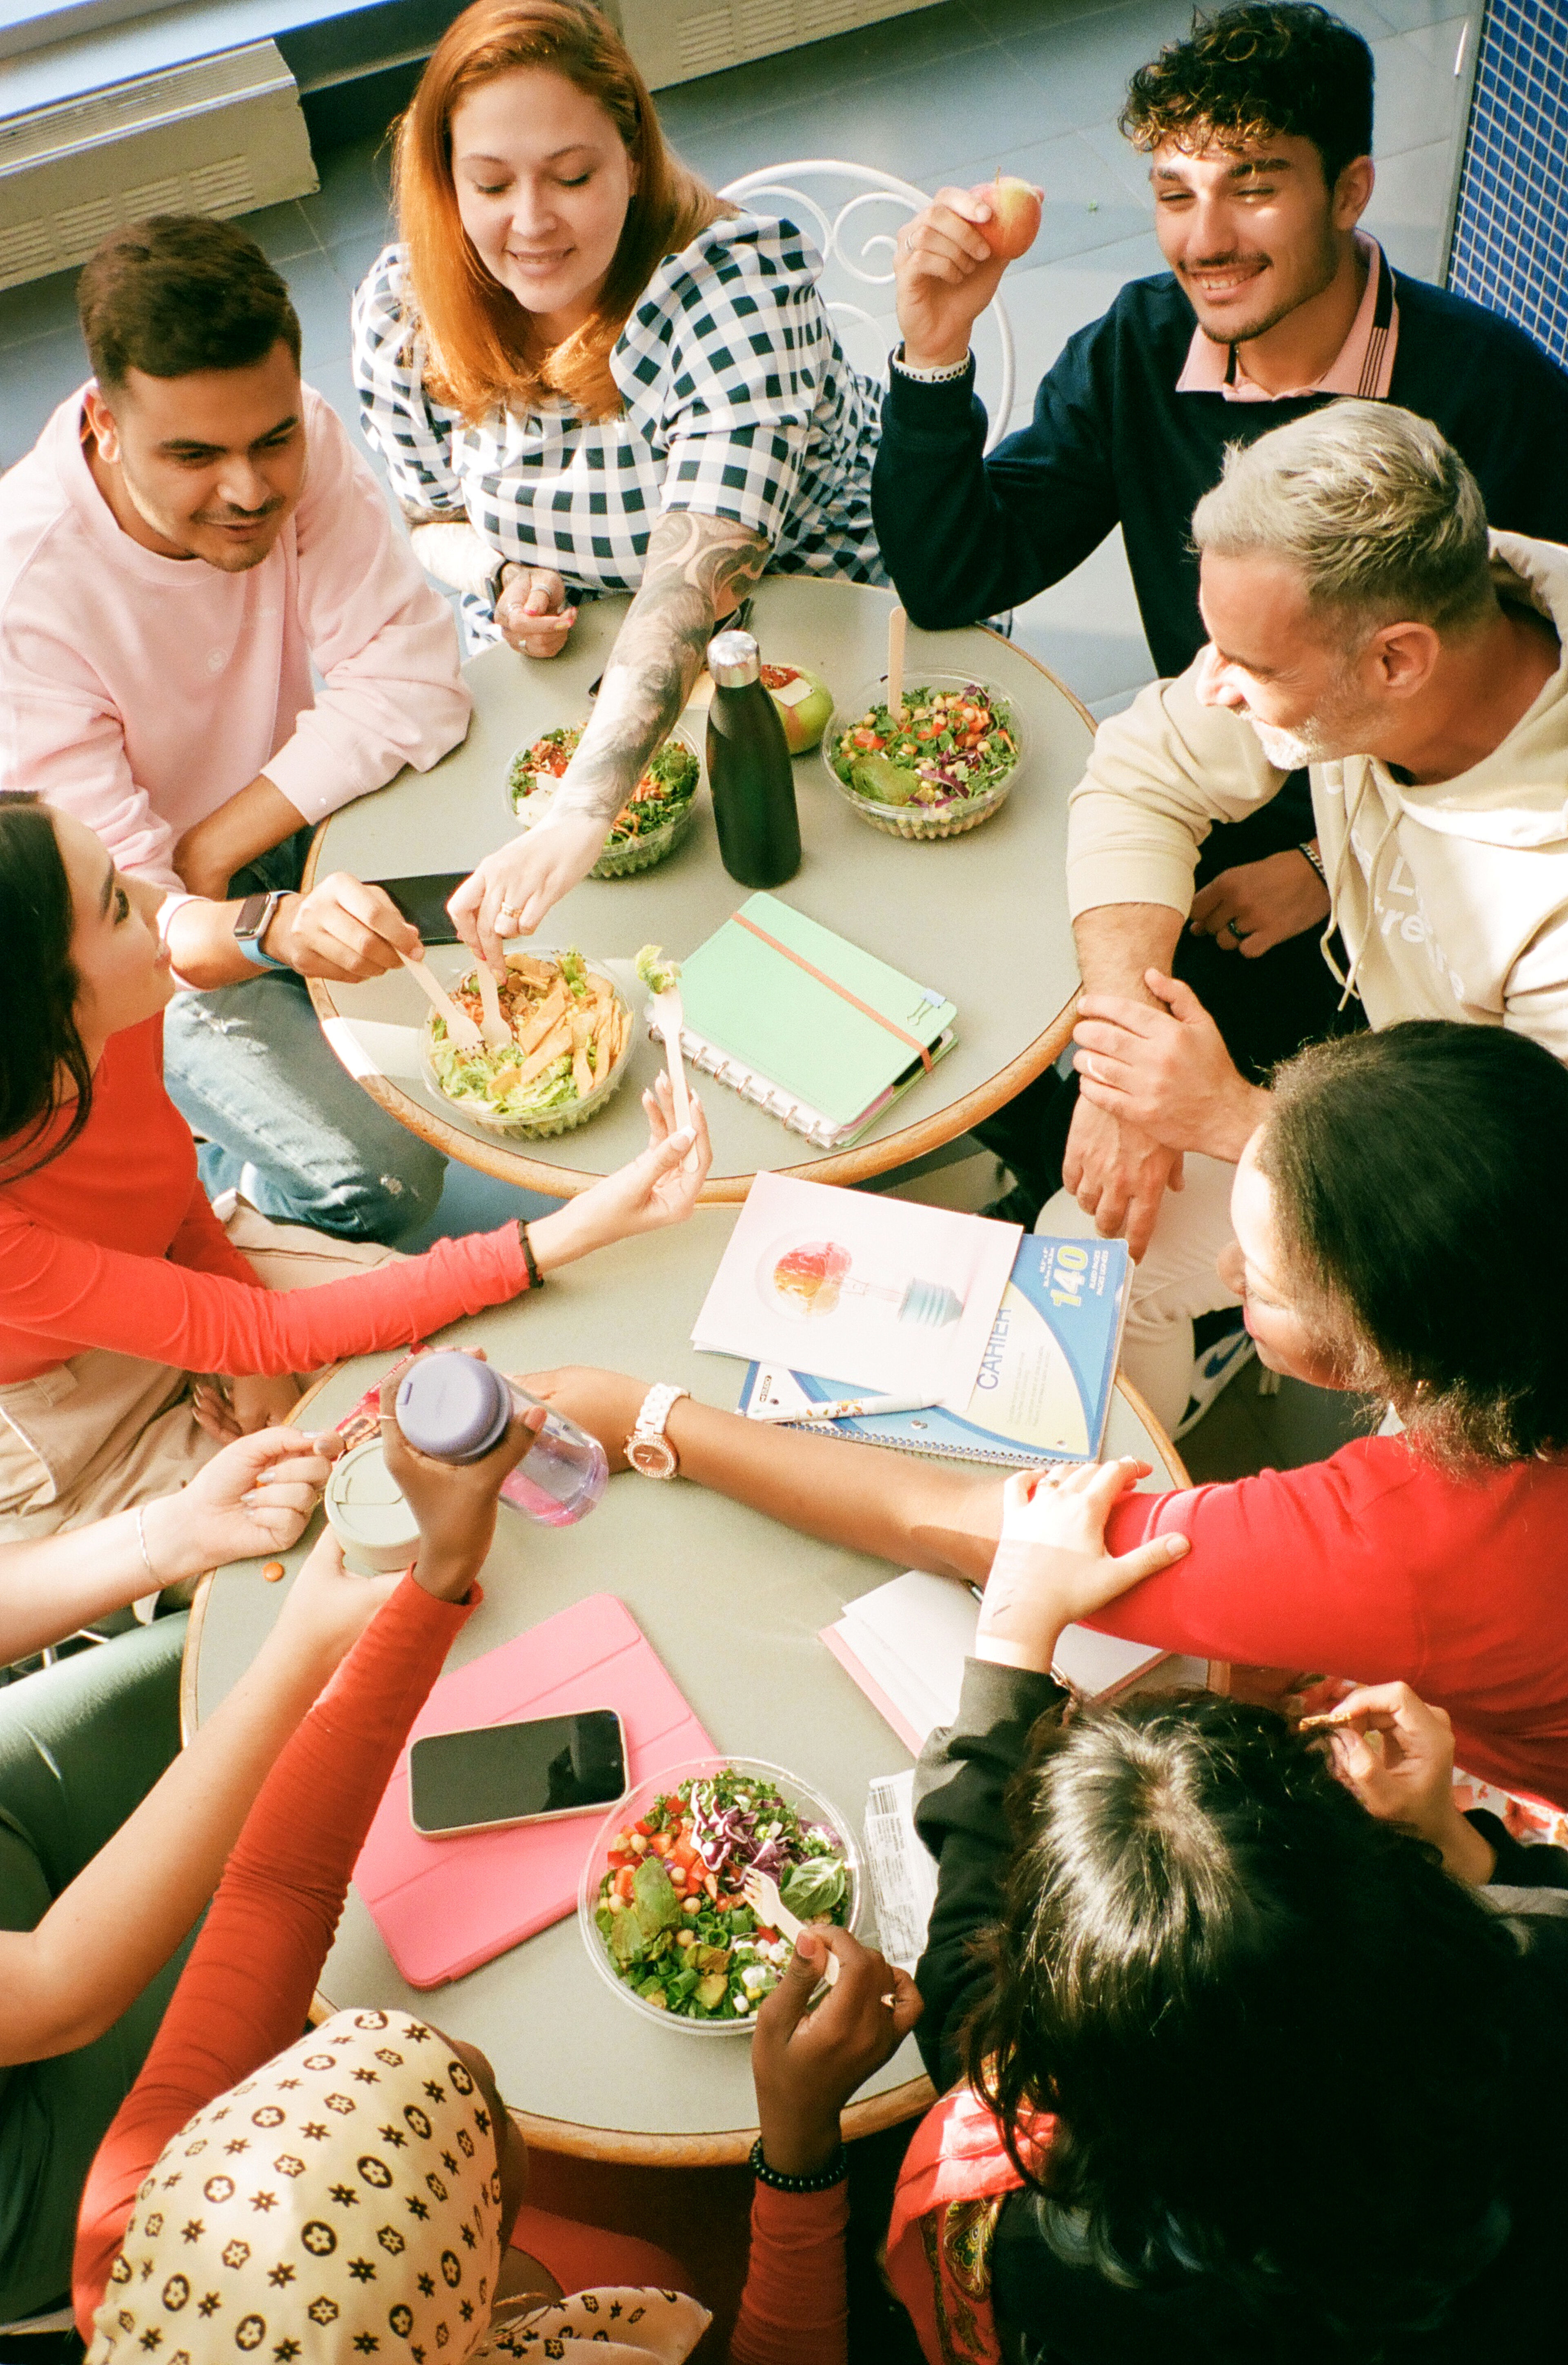 A diverse group of individuals of varying ages engaged in conversation around a table with healthy salads, books, and smartphones.